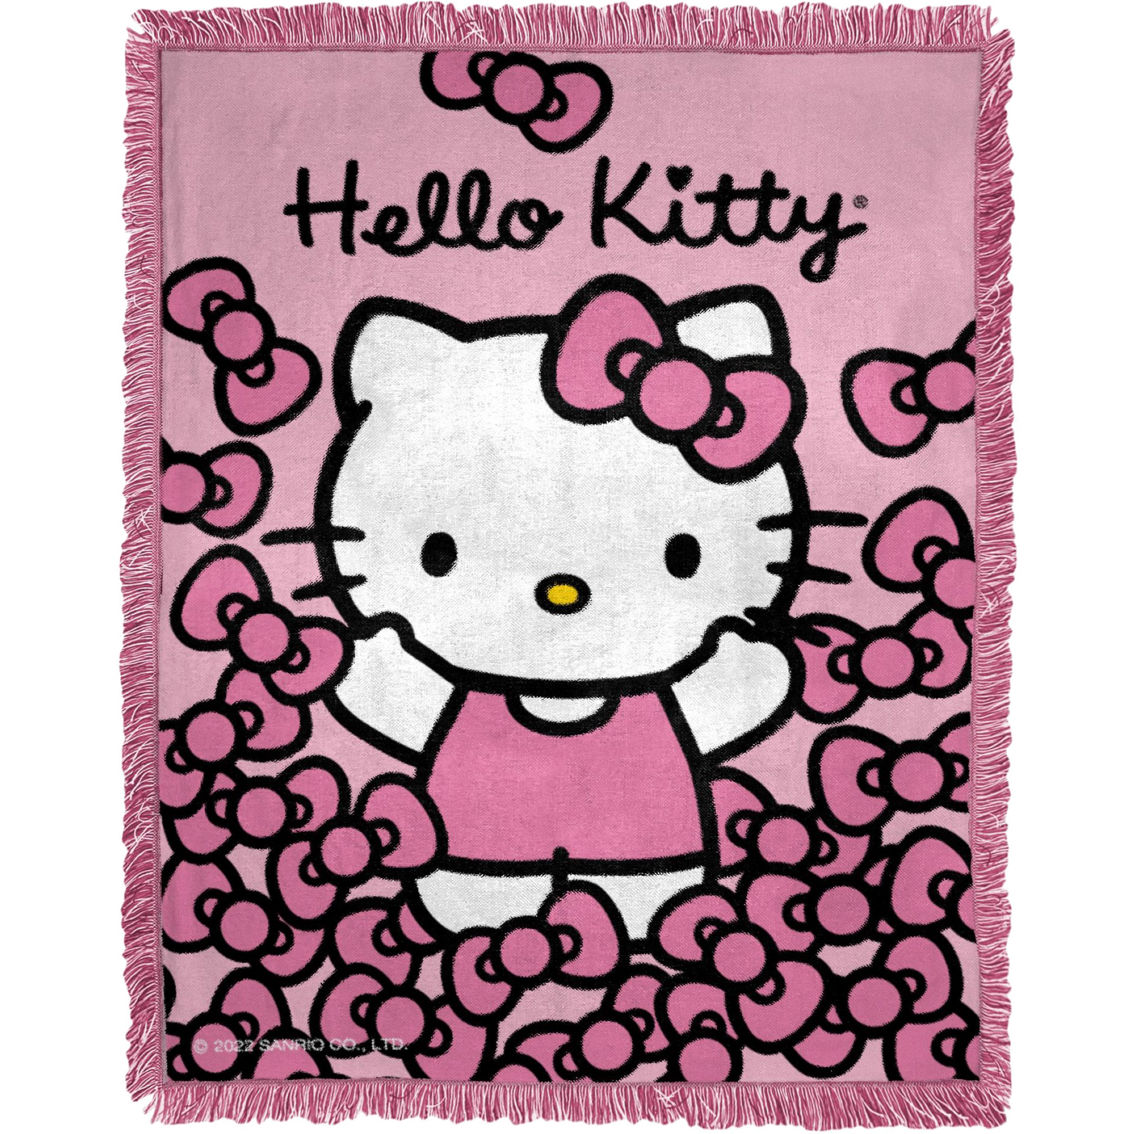 Northwest Hello Kitty More Bows Woven Jacquard 46 X 60 In. Throw ...